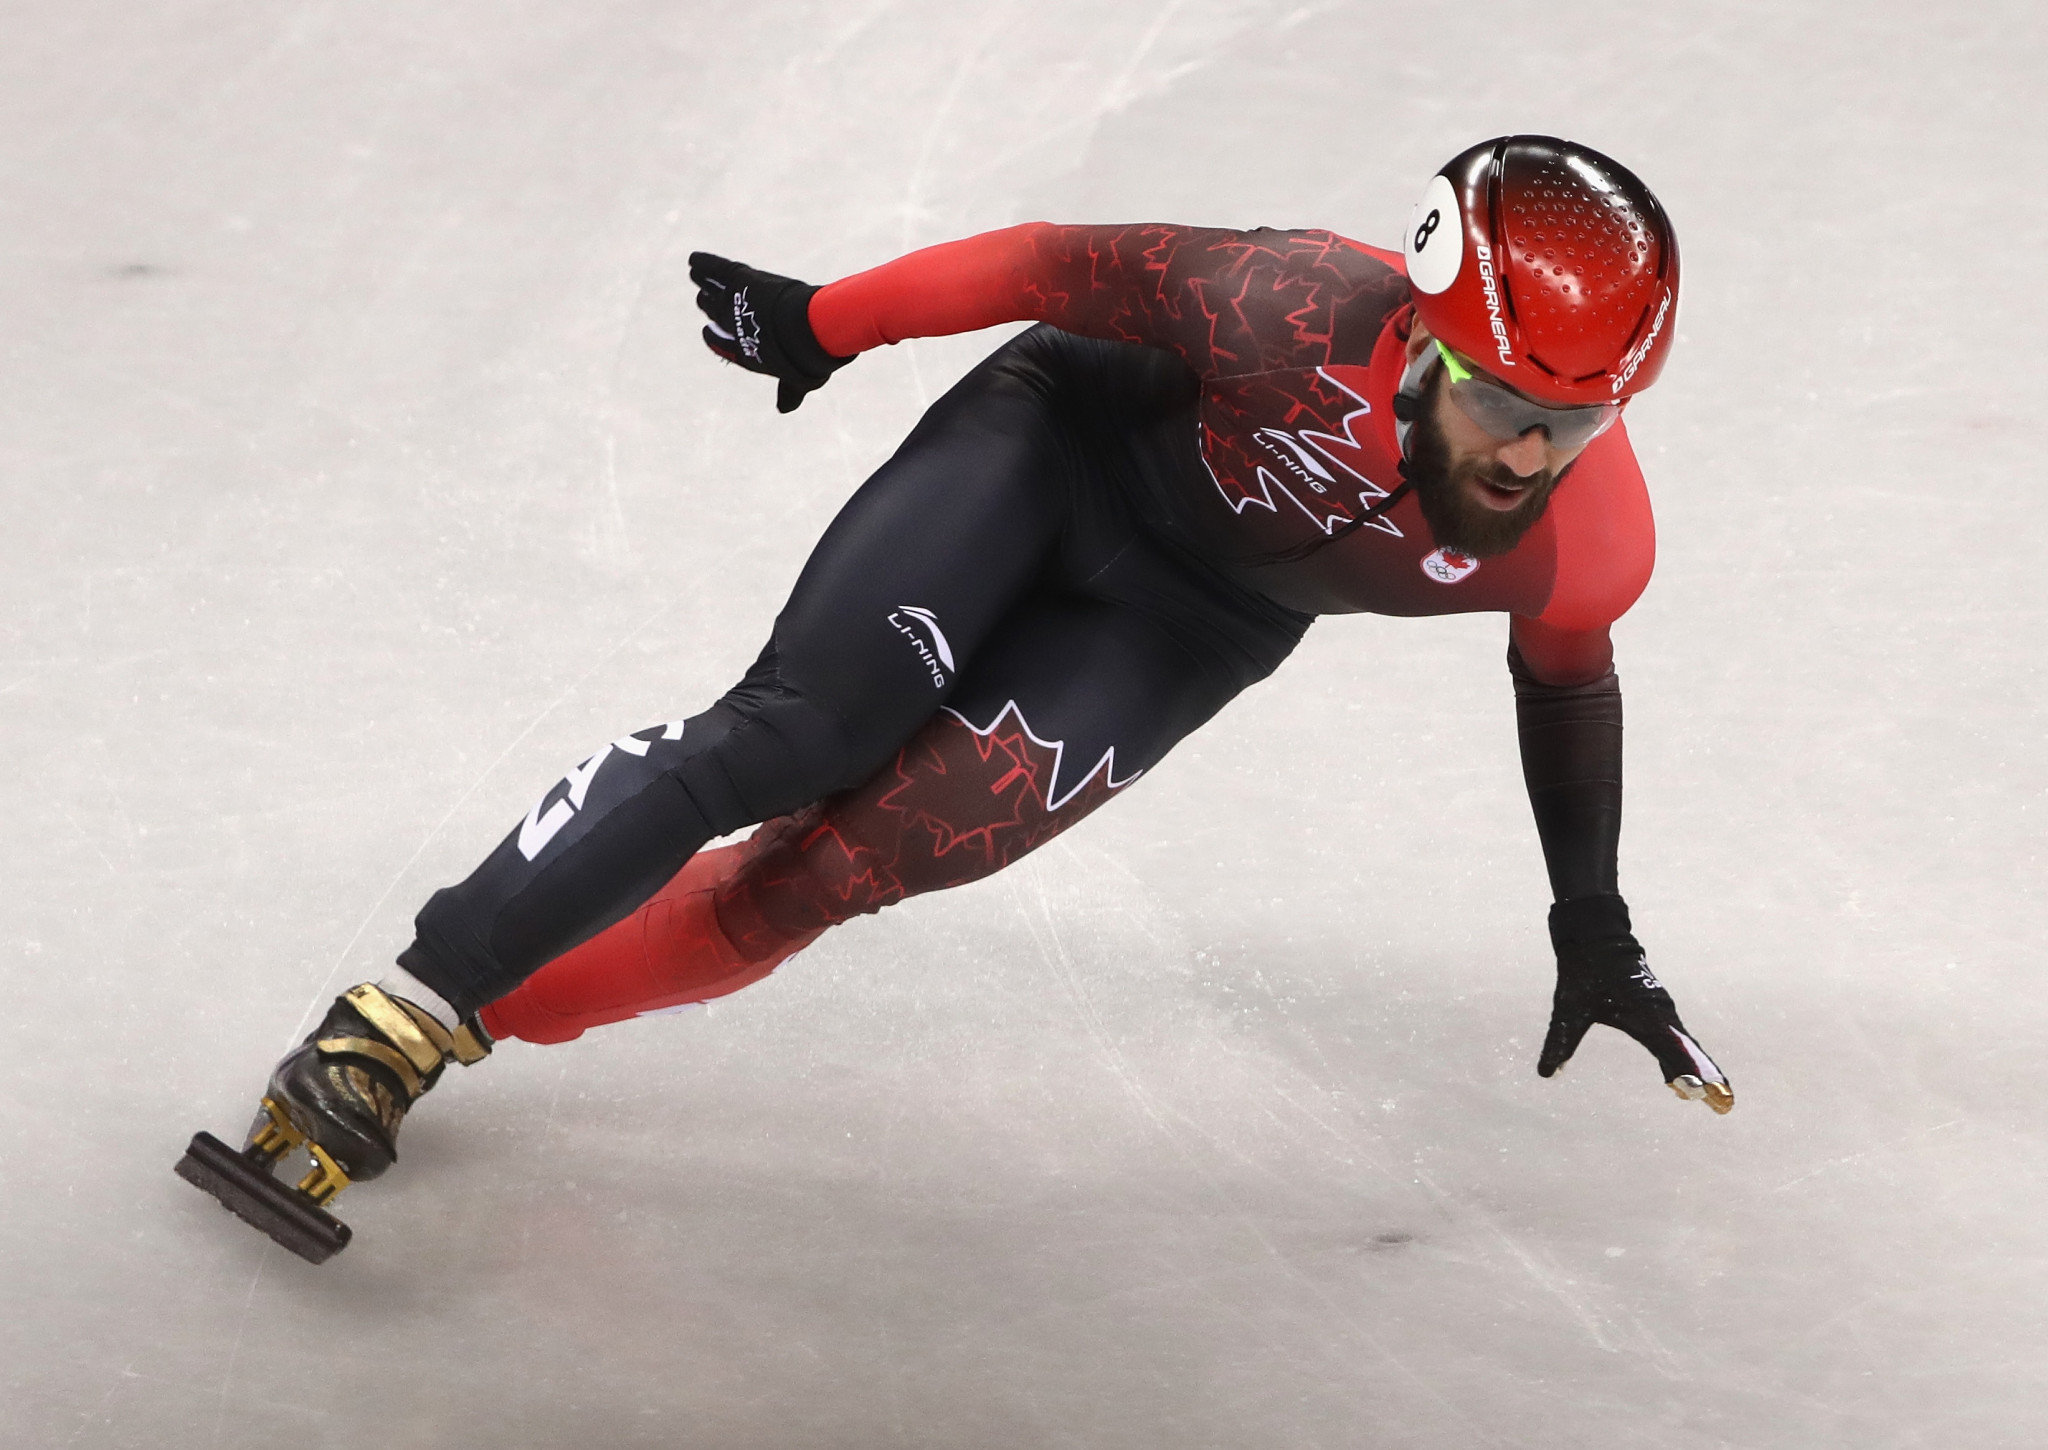 Canada's Charles Hamelin was penalised for a false start in his race ©Getty Images